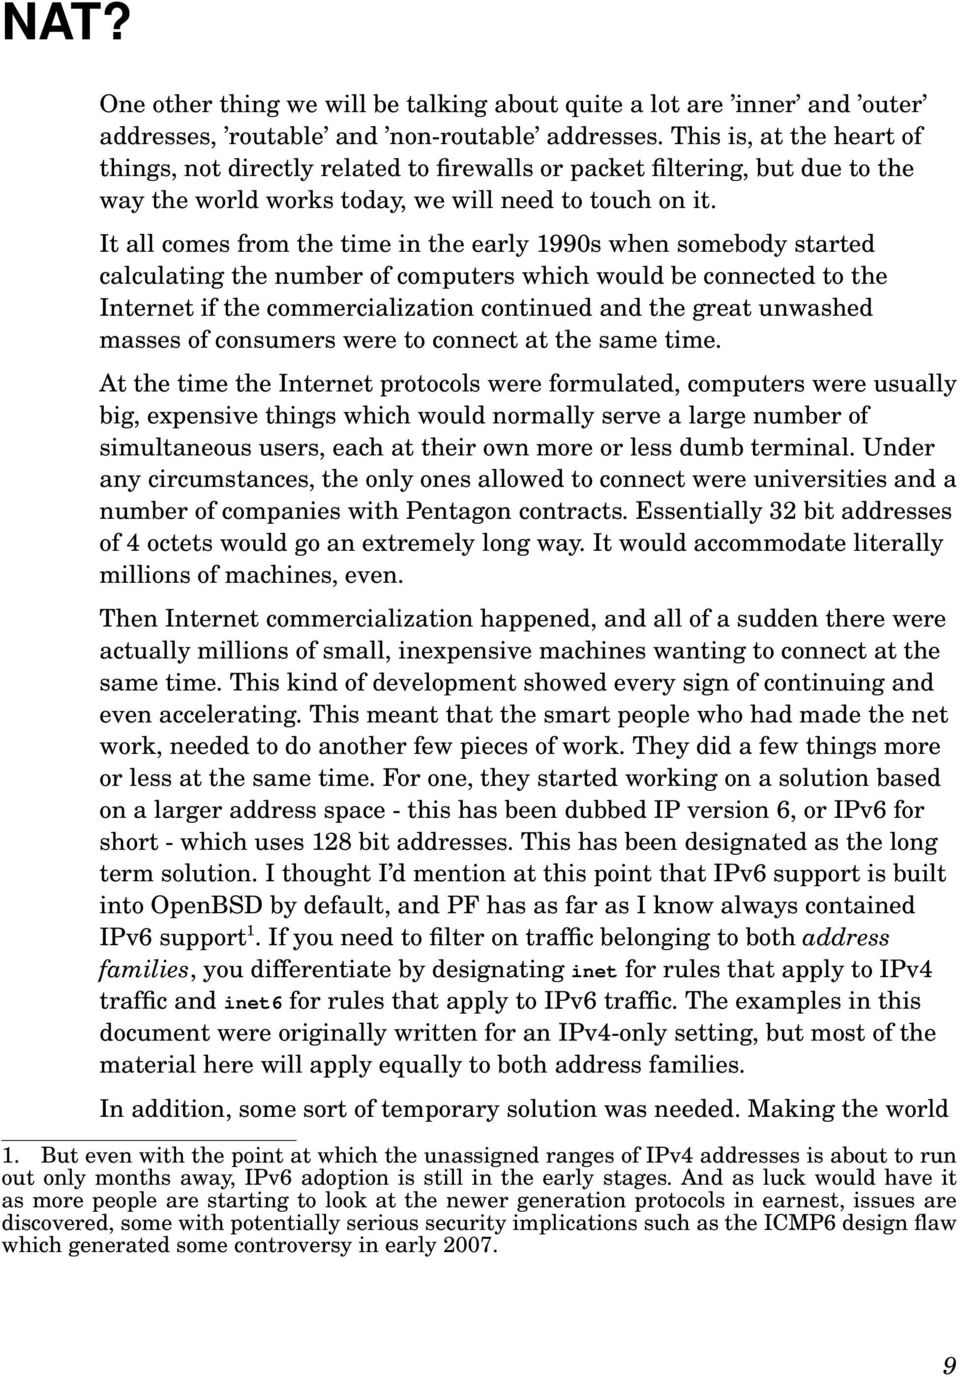 It all comes from the time in the early 1990s when somebody started calculating the number of computers which would be connected to the Internet if the commercialization continued and the great